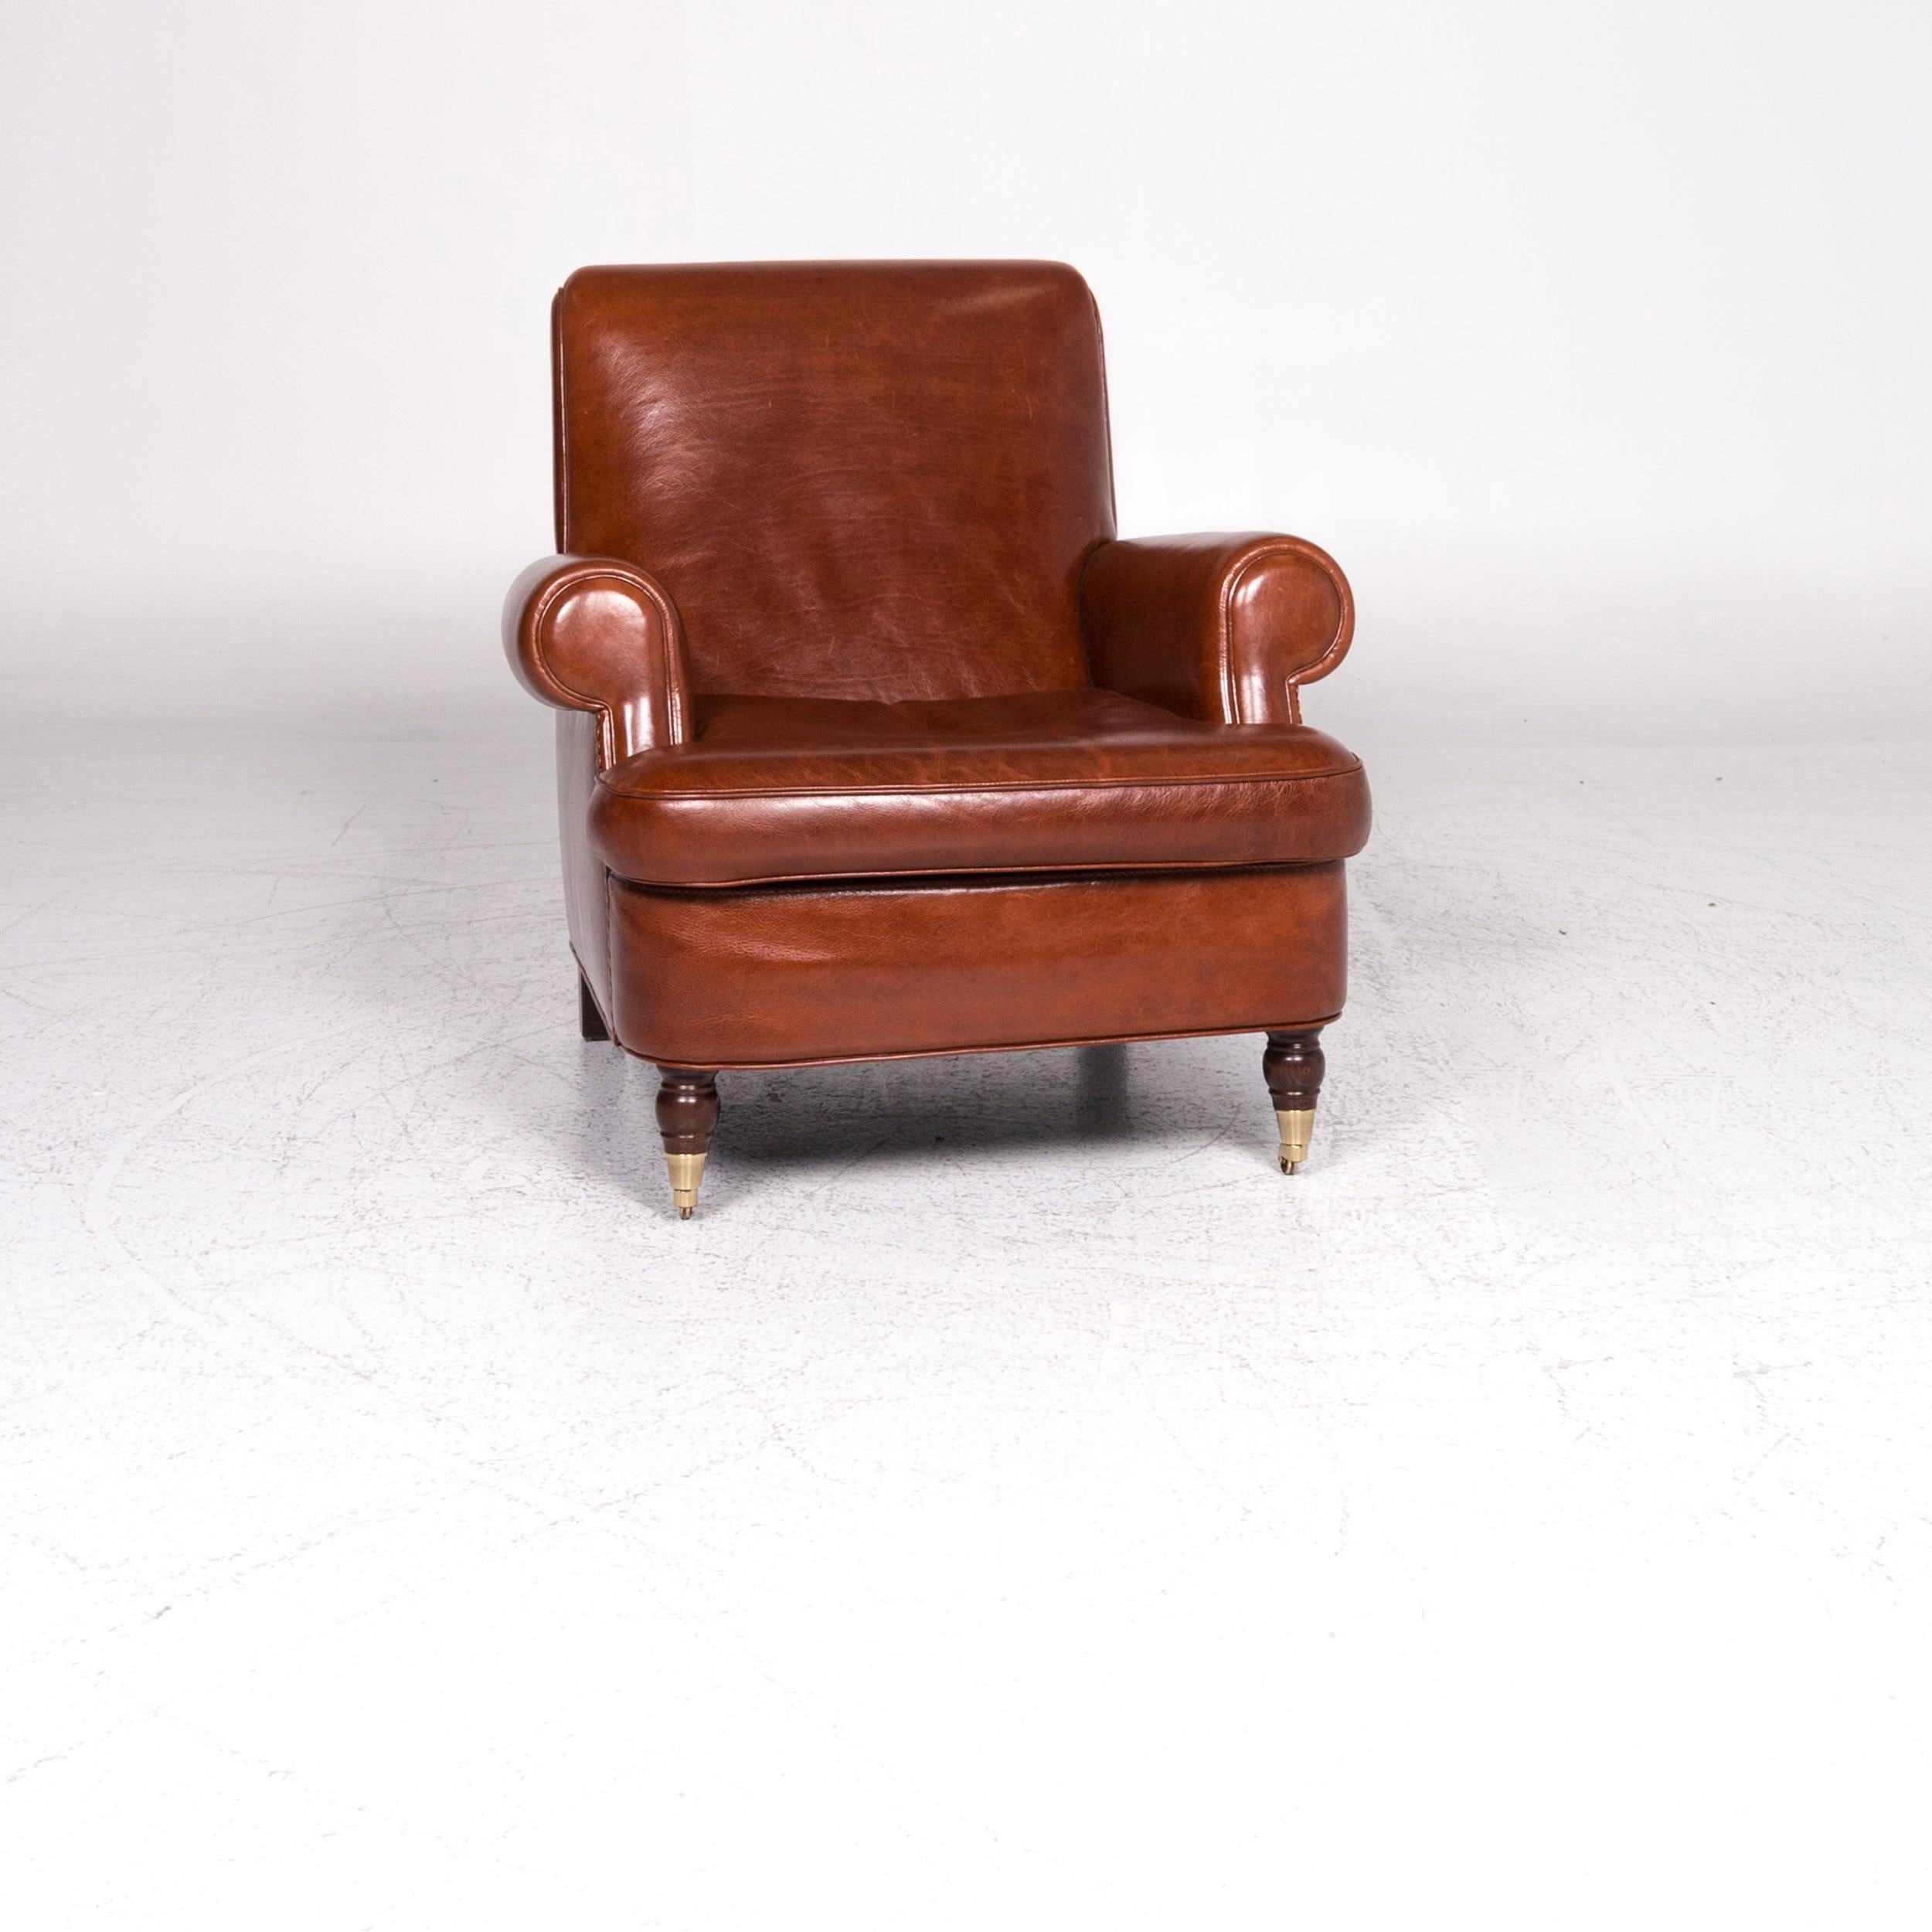 We bring to you a Baxter Charlotte designer leather armchair brown.

 Product measurements in centimeters:
 
Depth: 109
Width: 86
Height: 91
Seat-height: 46
Rest-height: 62
Seat-depth: 62
Seat-width: 52
Back-height: 49.

 